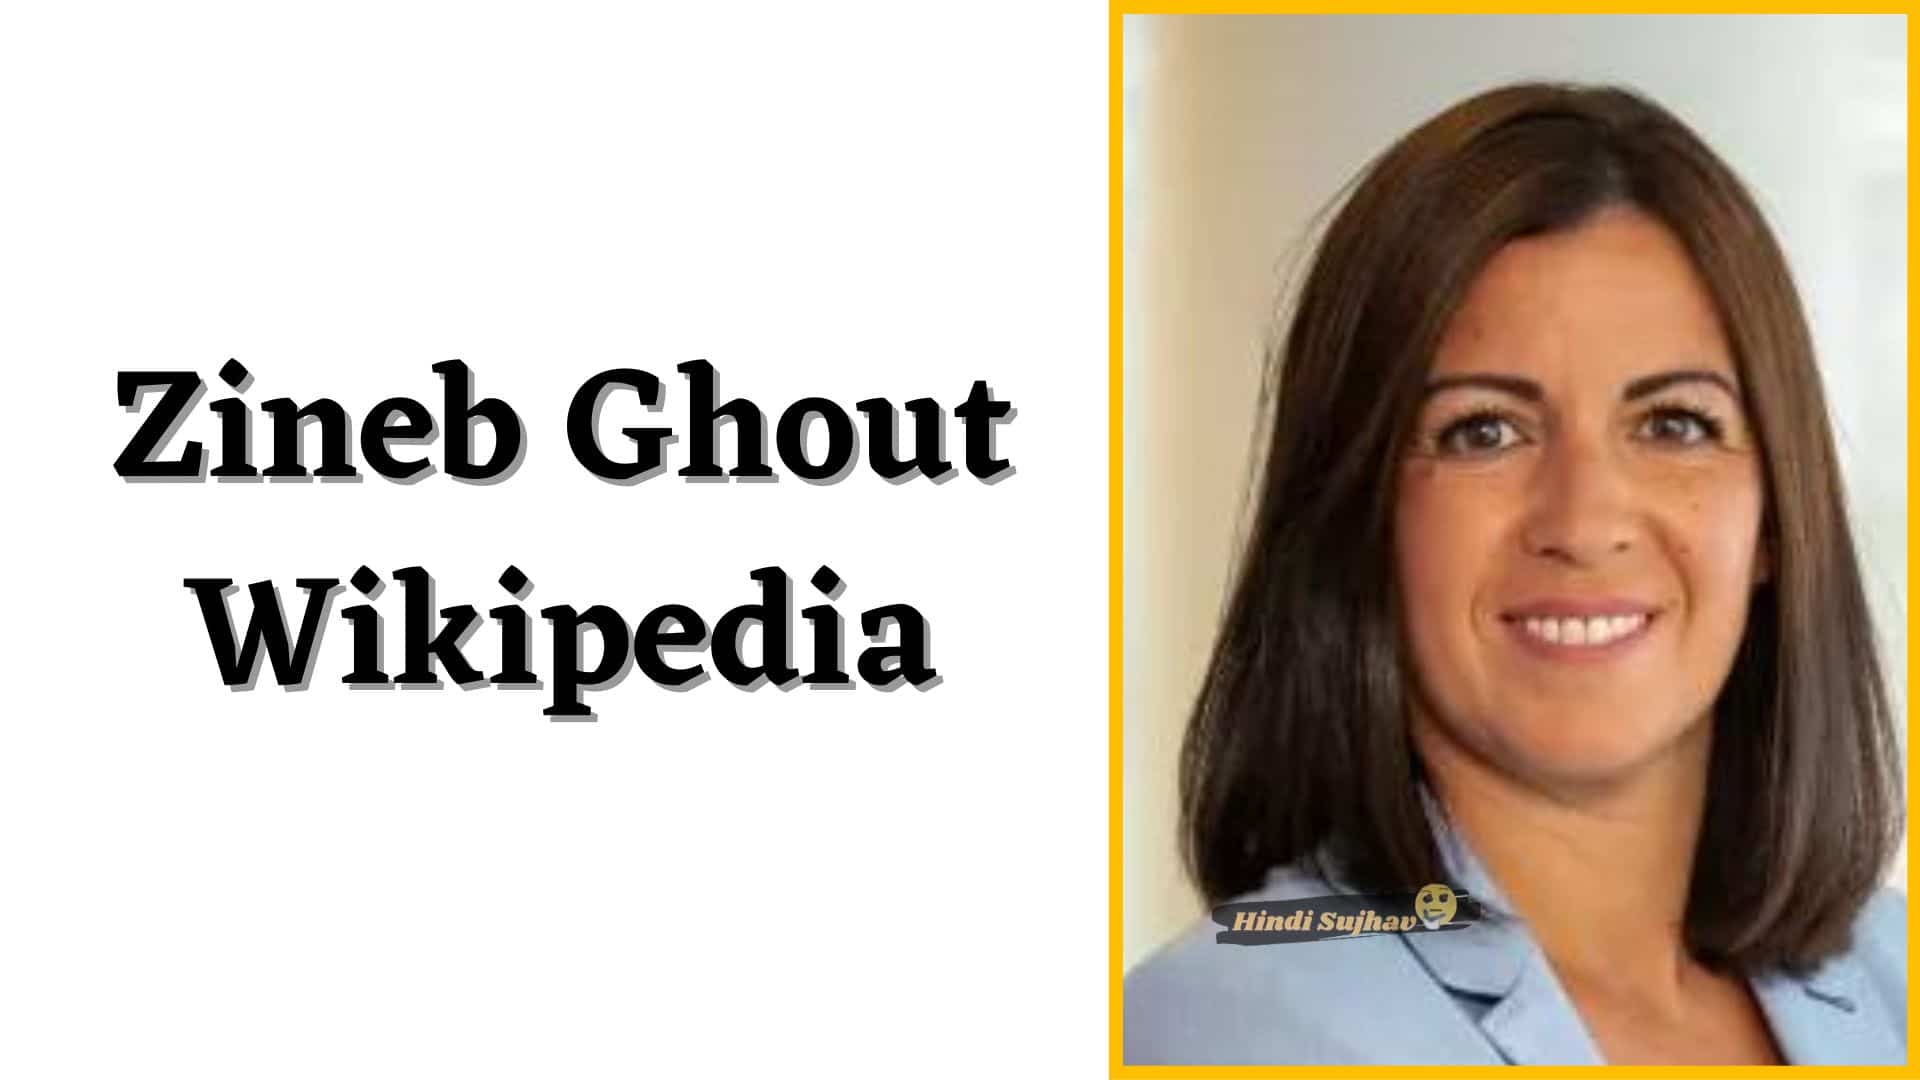 Zineb Ghout Wikipedia, Wiki, Quitte Renault, Age